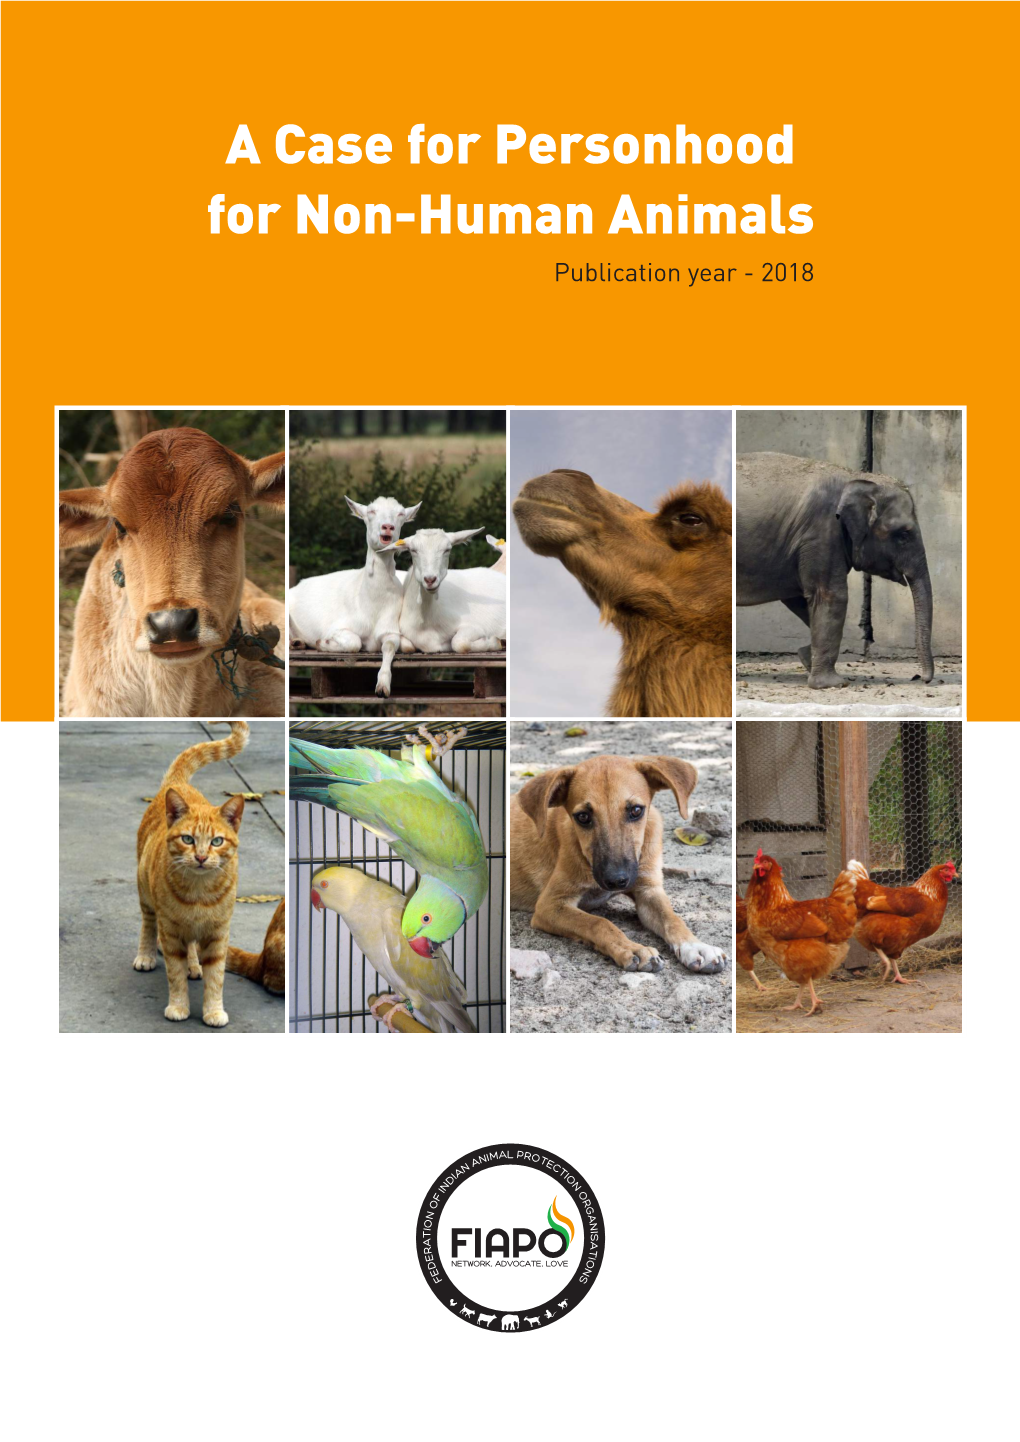 A Case for Personhood for Non-Human Animals Publication Year - 2018 About Federation of Indian Animal Protection Organisations (FIAPO)